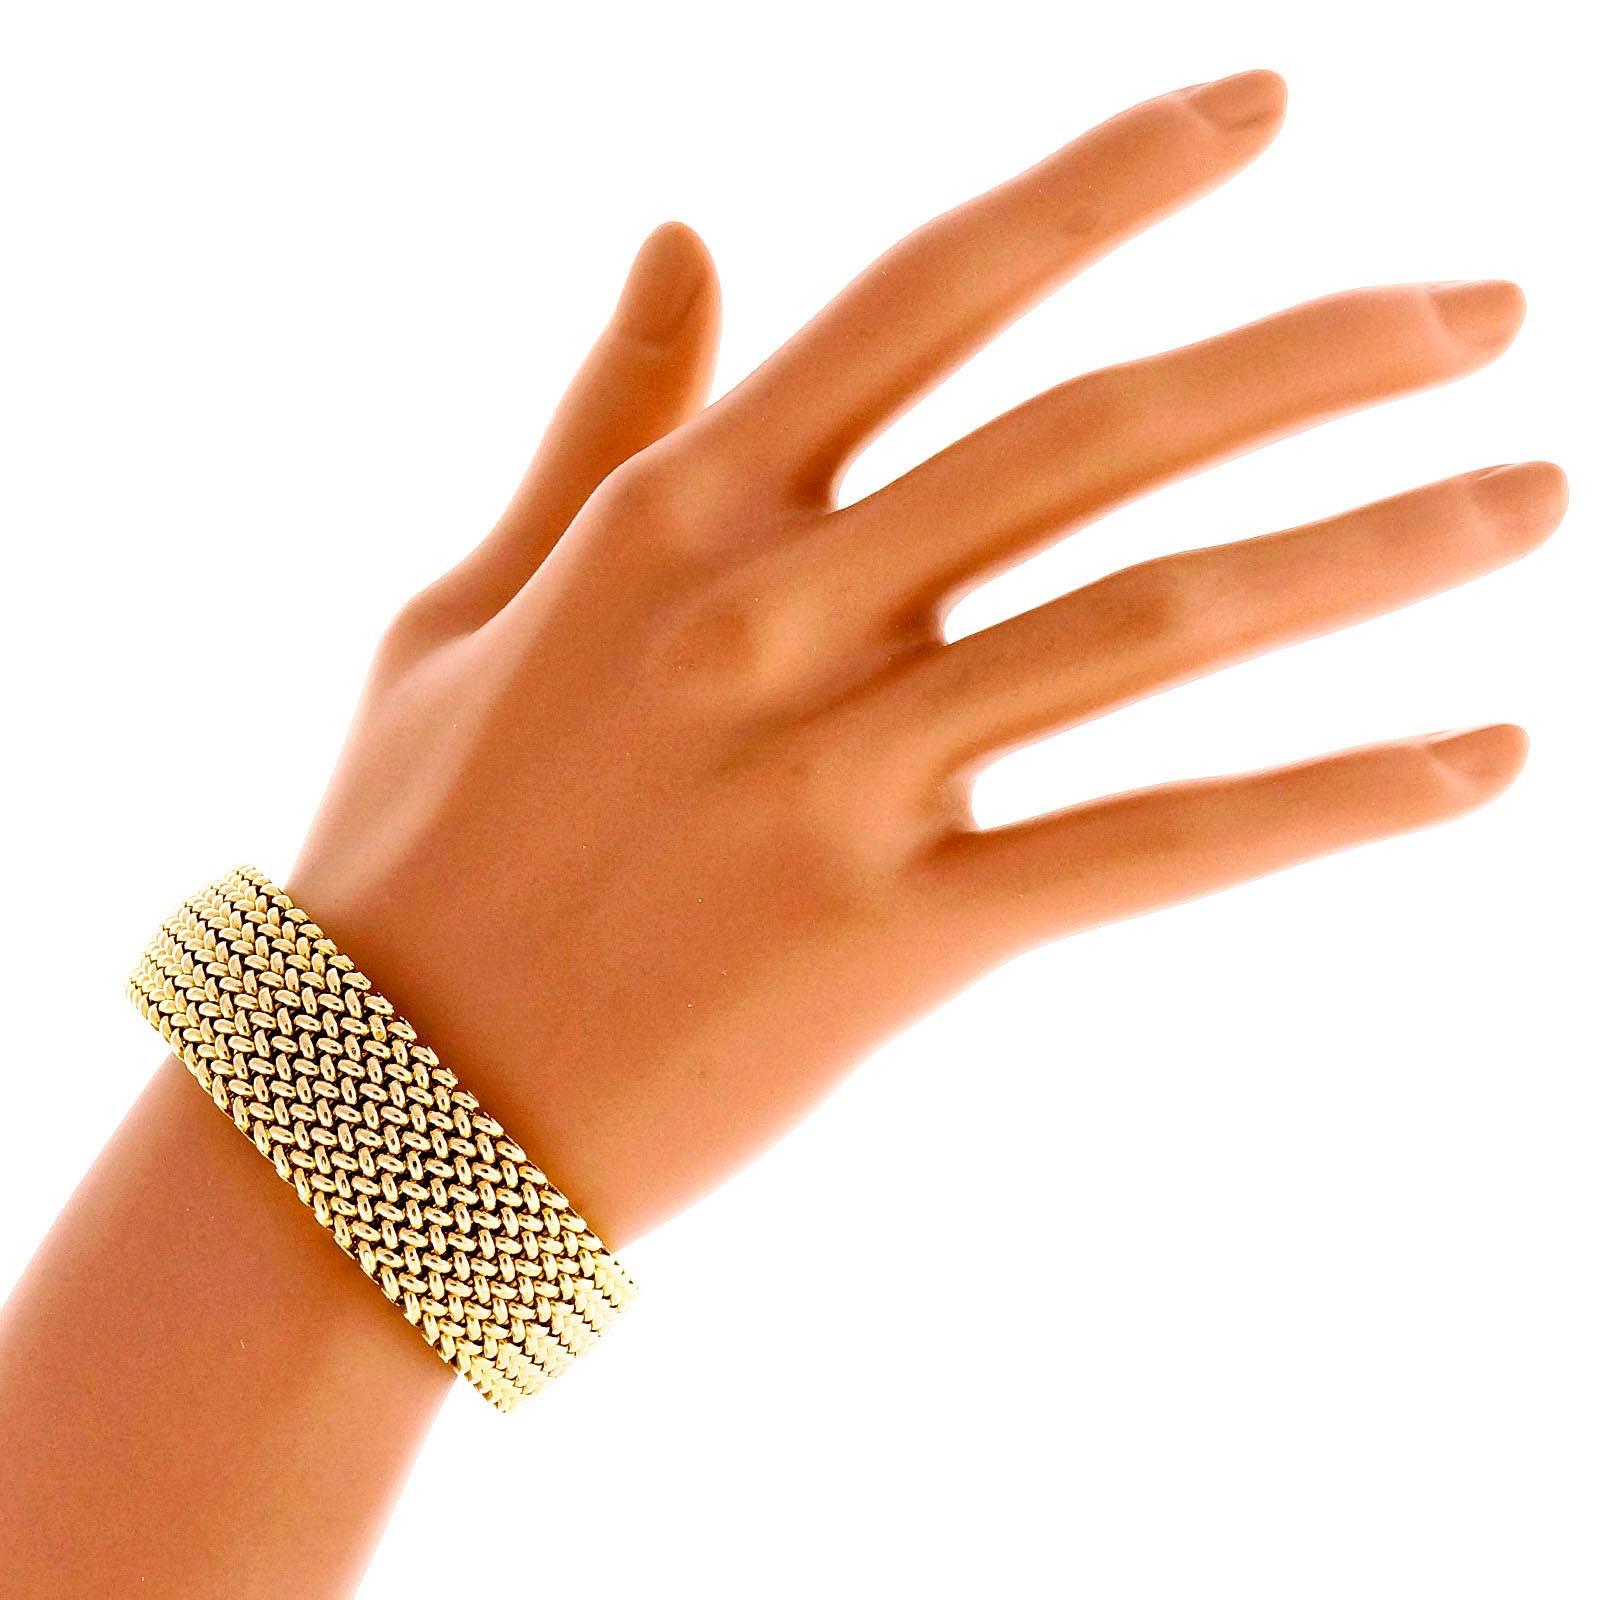 Unoaerre mesh 14k yellow gold mesh bracelet 7.75 inches long.

14k yellow gold
37.7 grams
Width: 7/8 inch
Tested and stamped: 14k
Hallmark: Unoaerre Italy *1 AR
Length: 7.75 inches
Width: 20.24mm
Depth: 3.99mm
